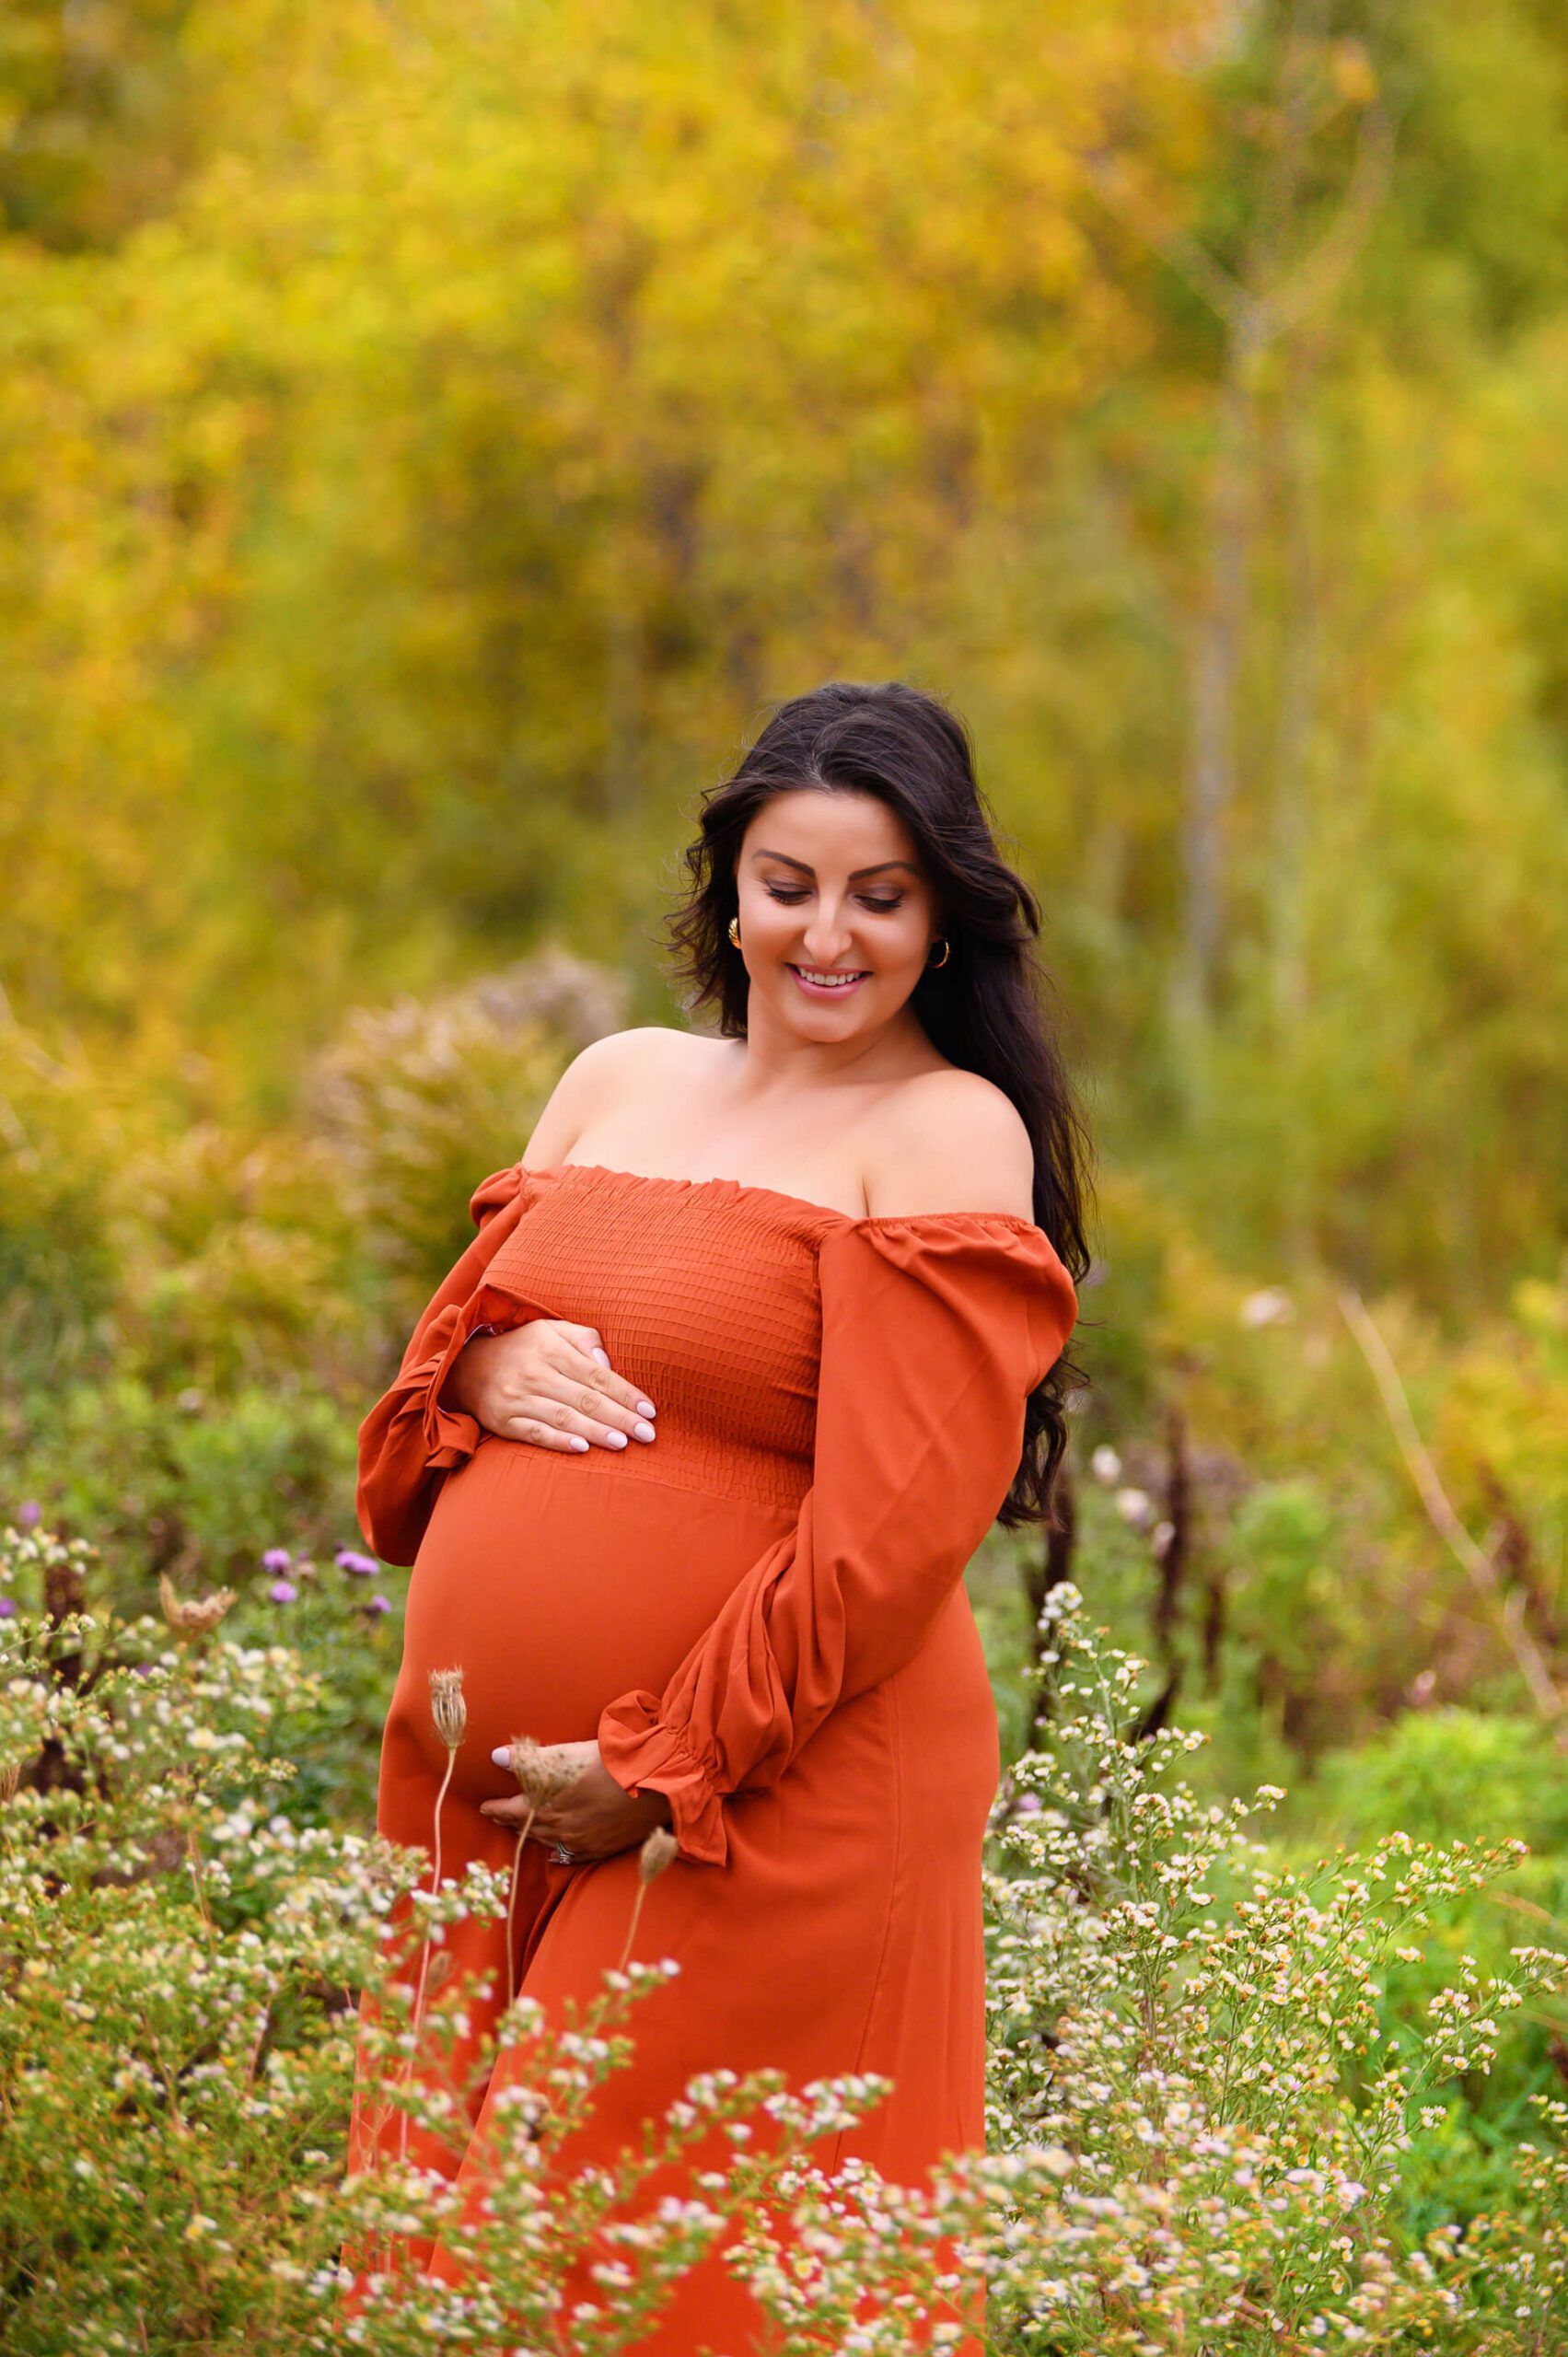 Mom in orange dress in the fall foilage outdoor maternity session